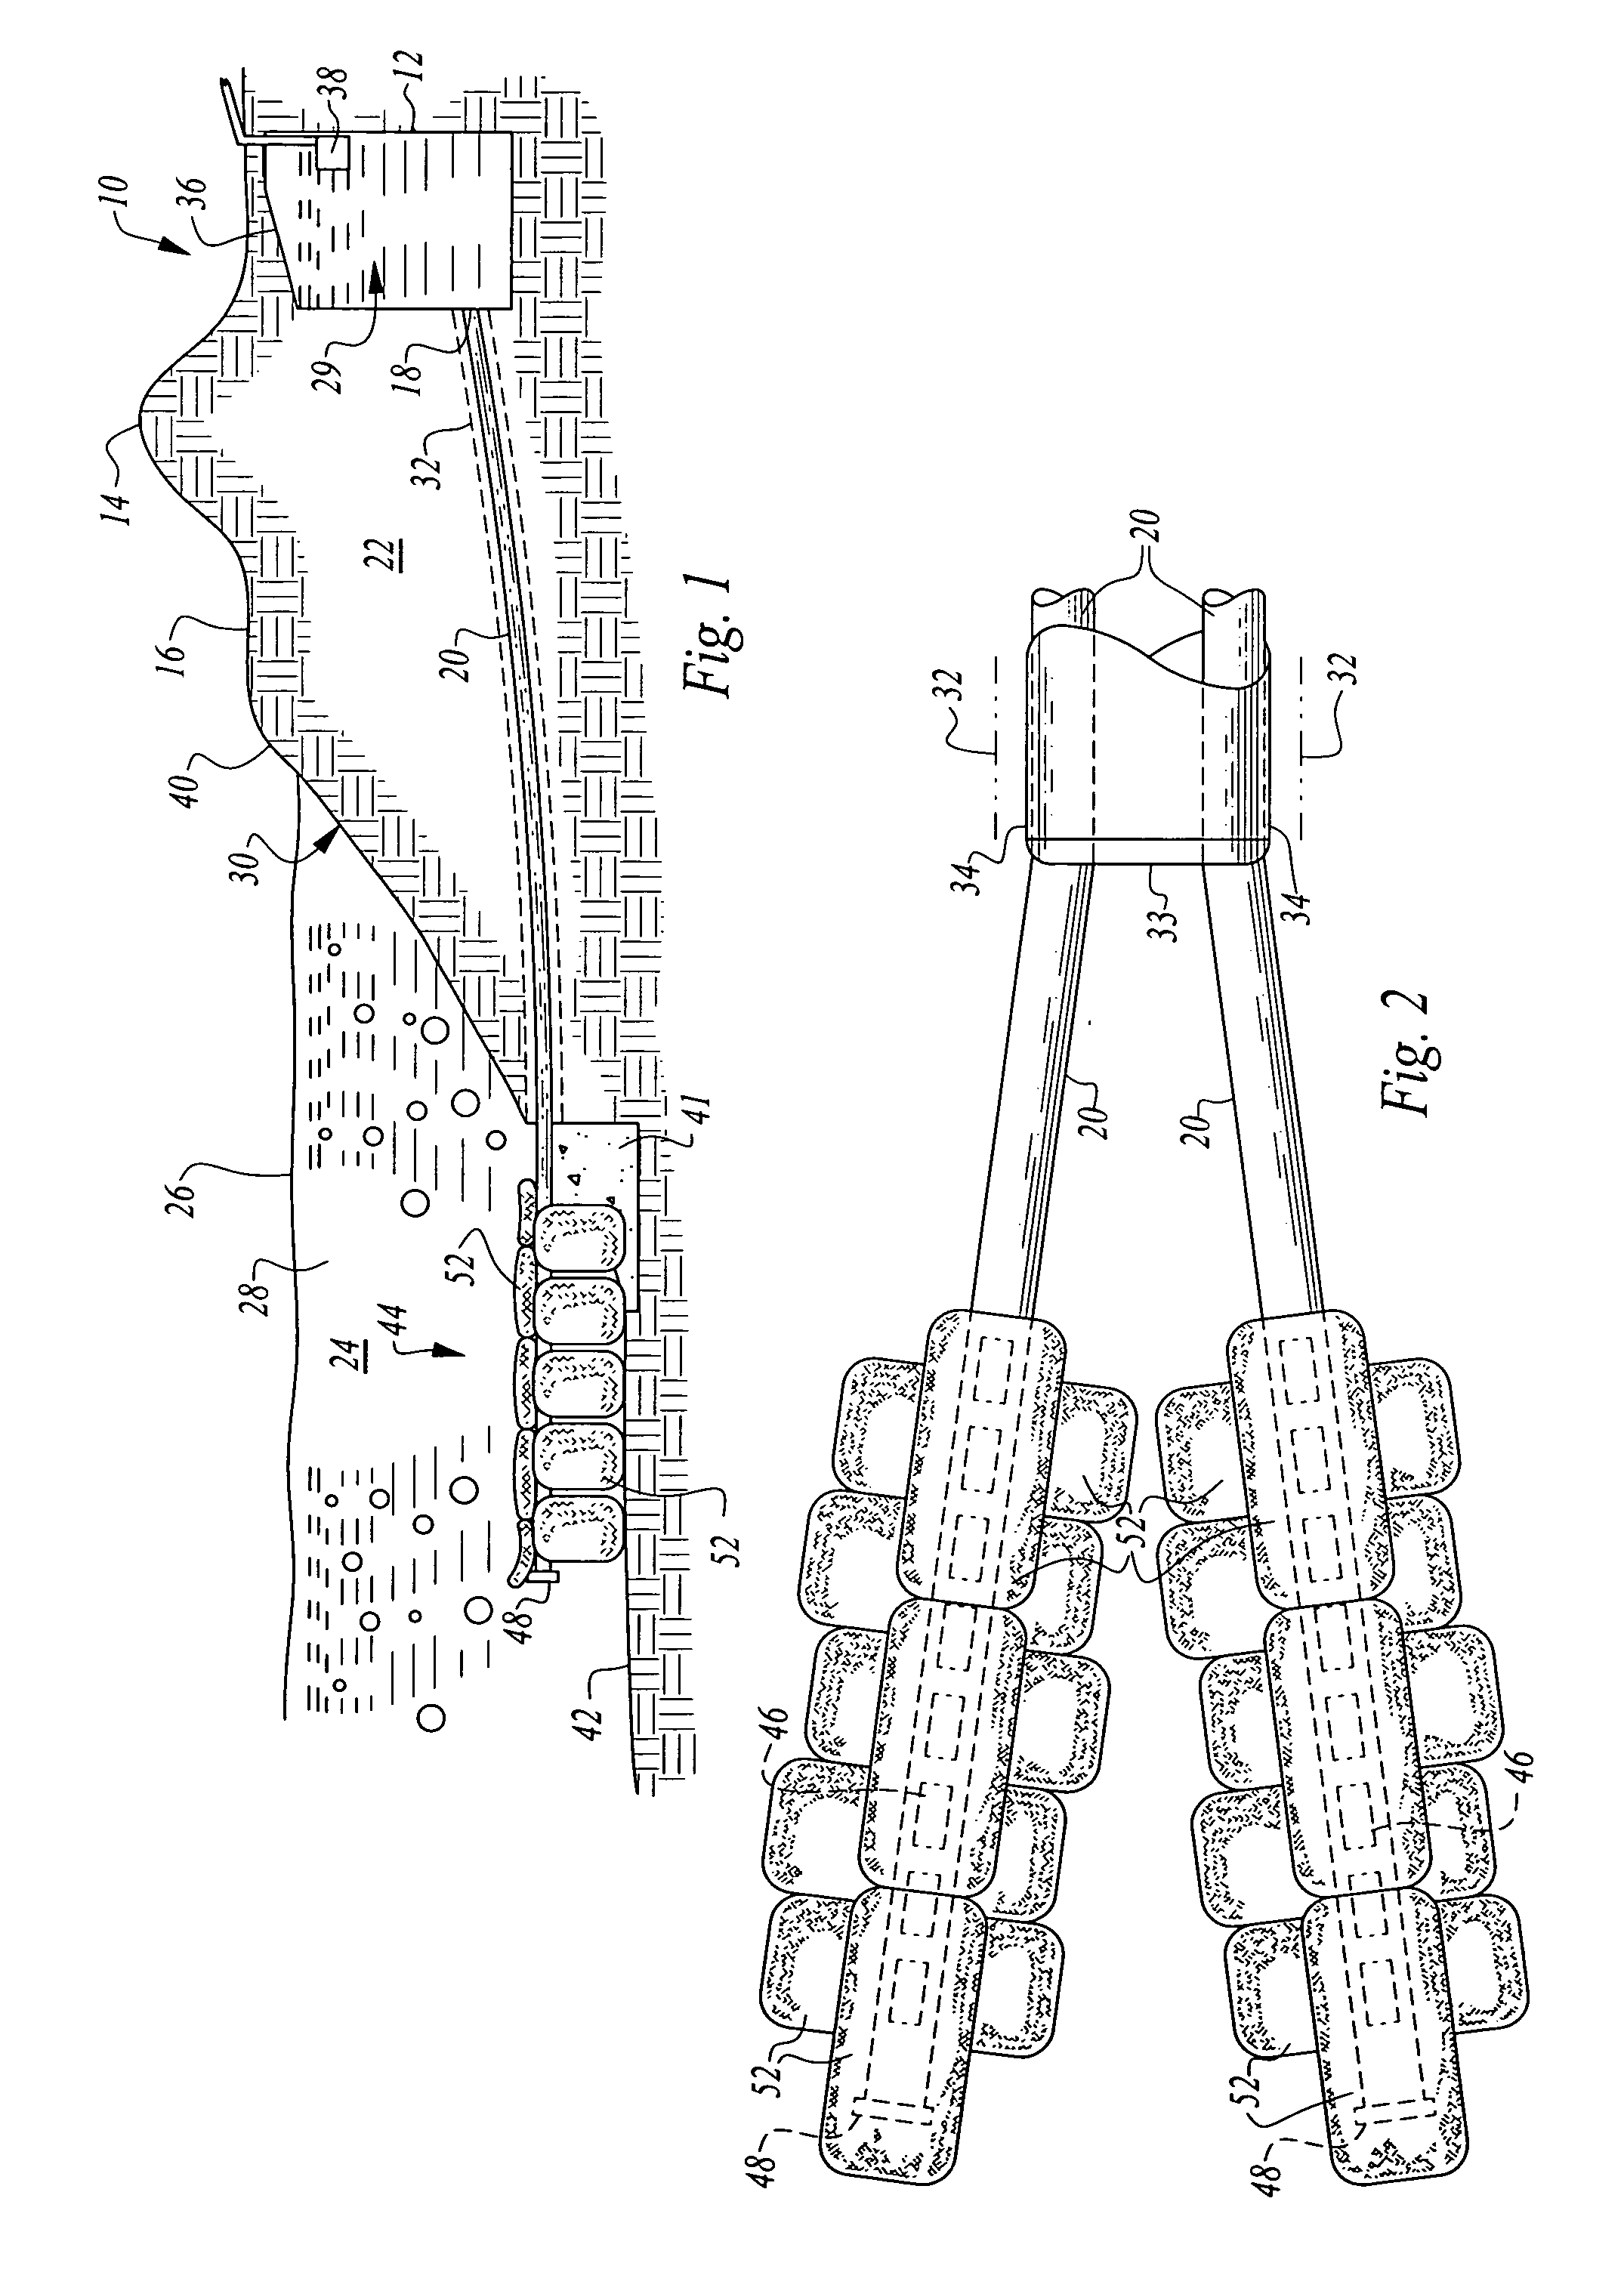 Method for constructing a synthetic infiltration collection system